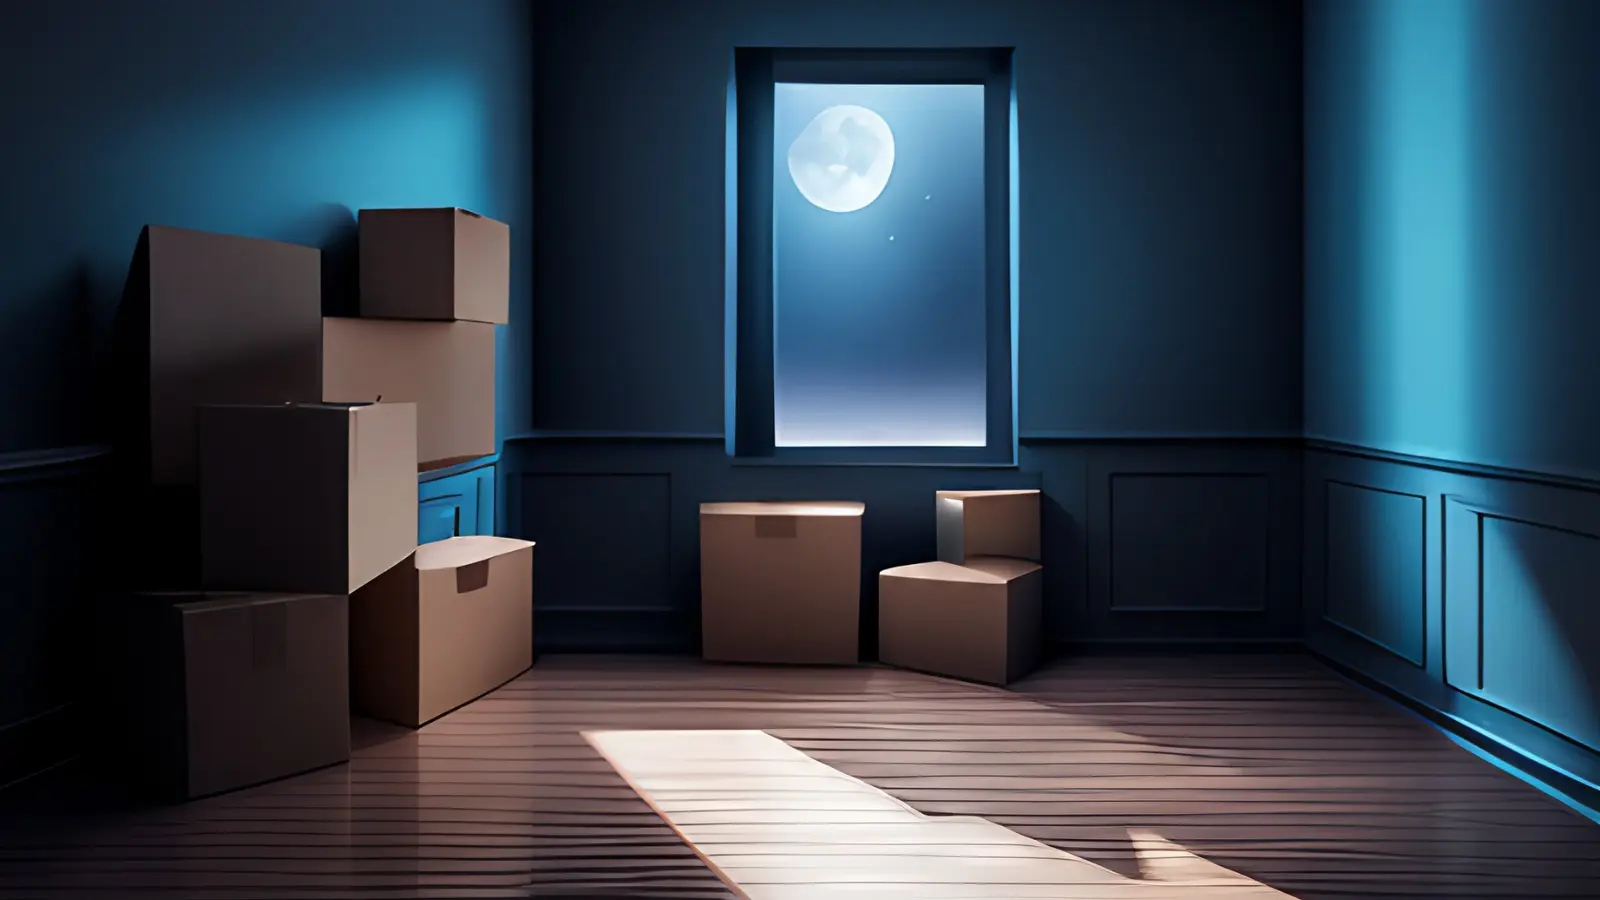 Pictured is a living room, devoid of any furniture except moving boxes. The sky outside is dark, with a full moon lighting the room in a cool glow. The scene is contemplative, as if asking the question, "what is the recent past, present, and future of full-service moving companies?"